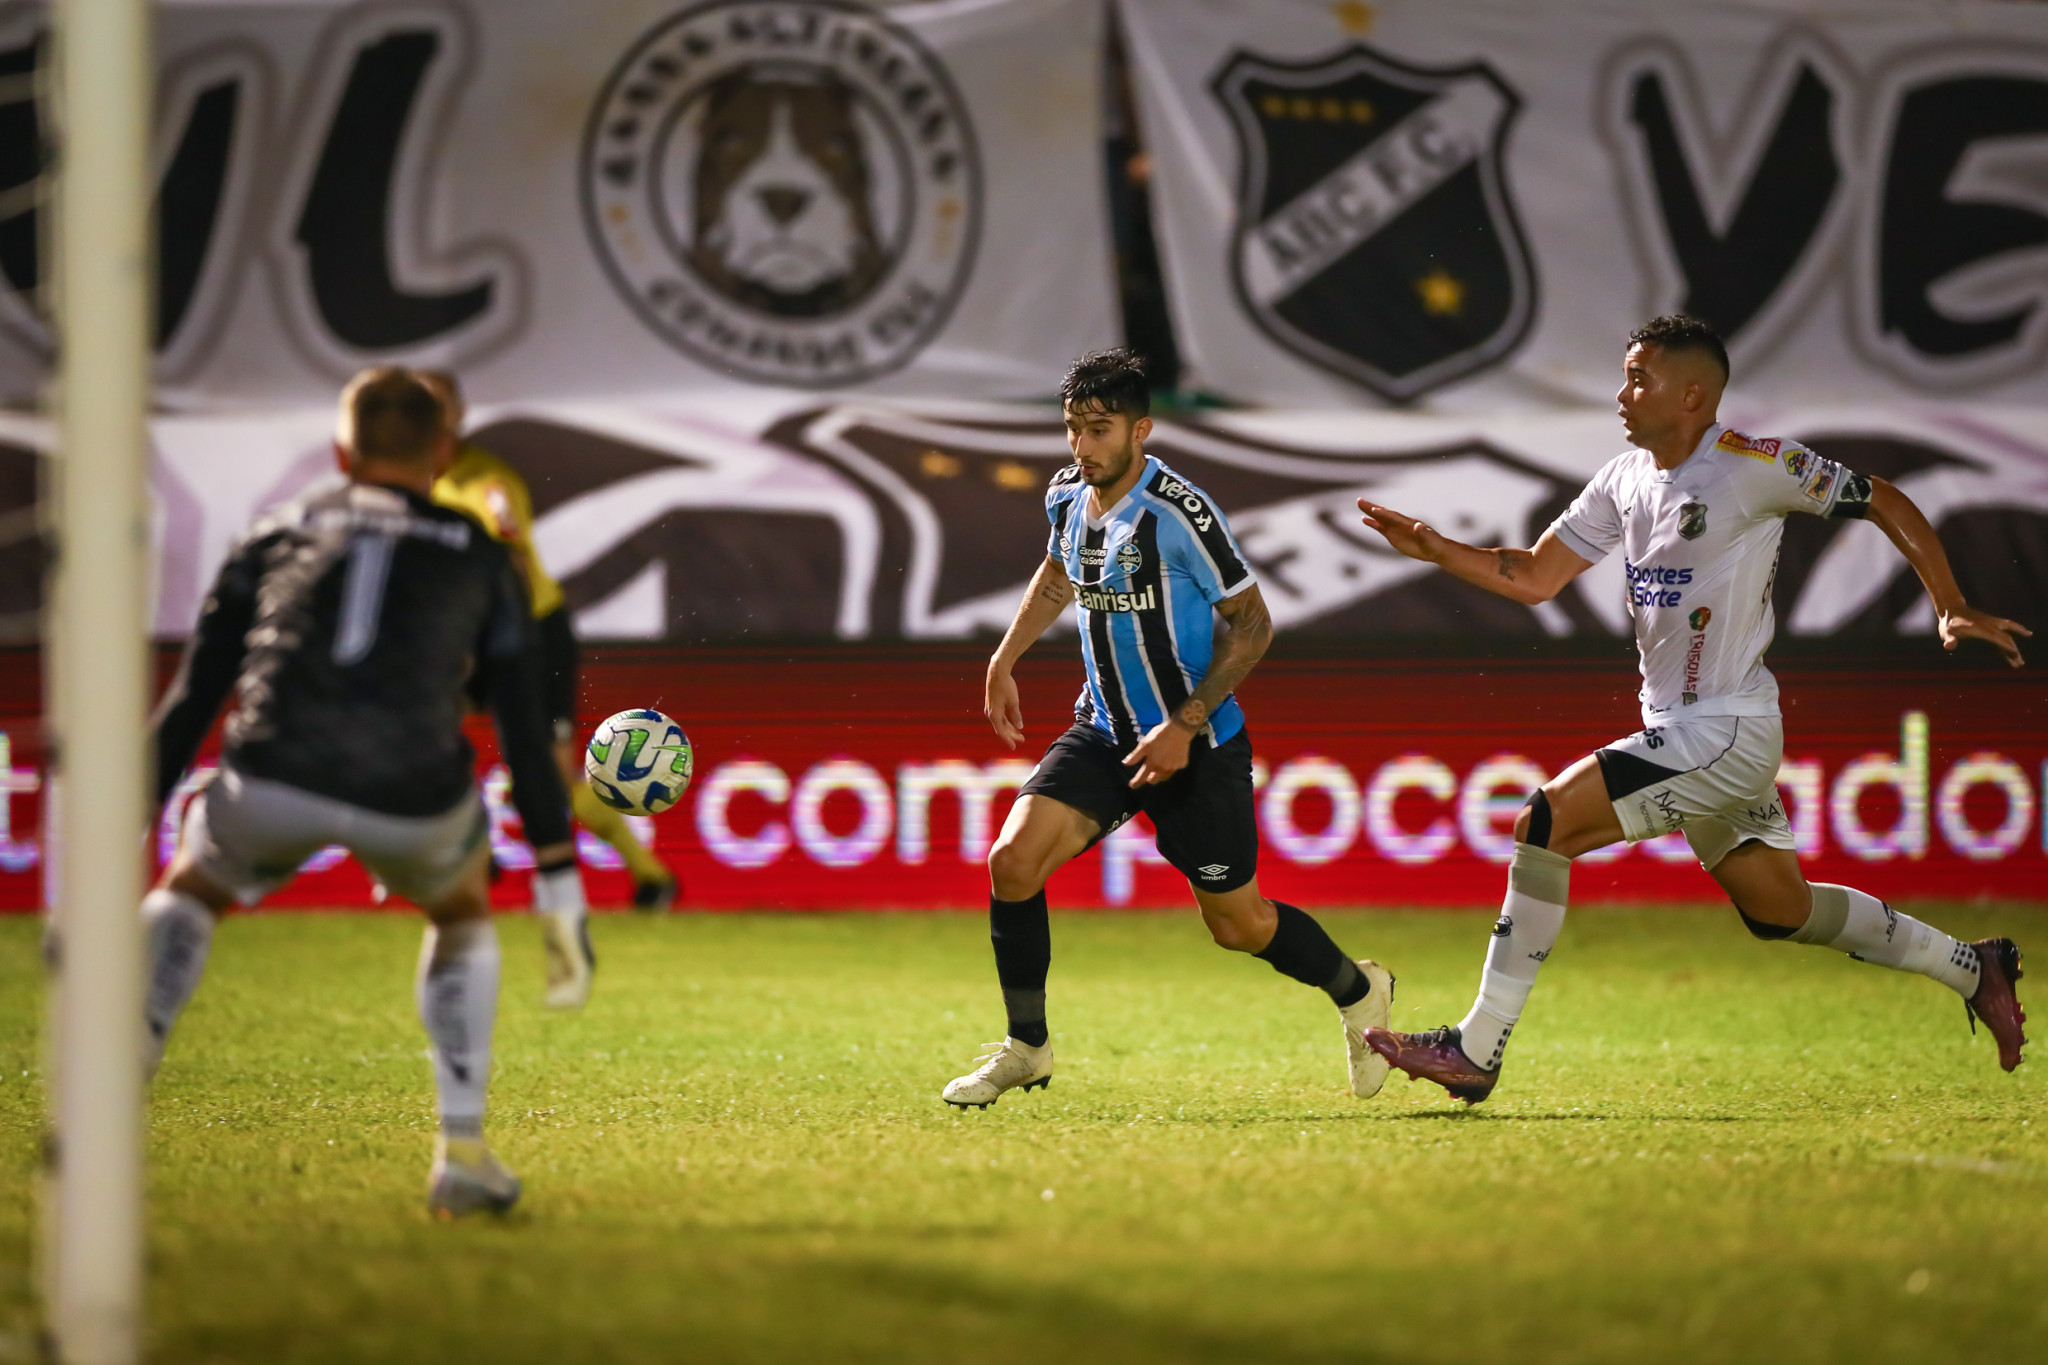 Ceará SC vs Tombense: An Exciting Clash of Two Formidable Teams